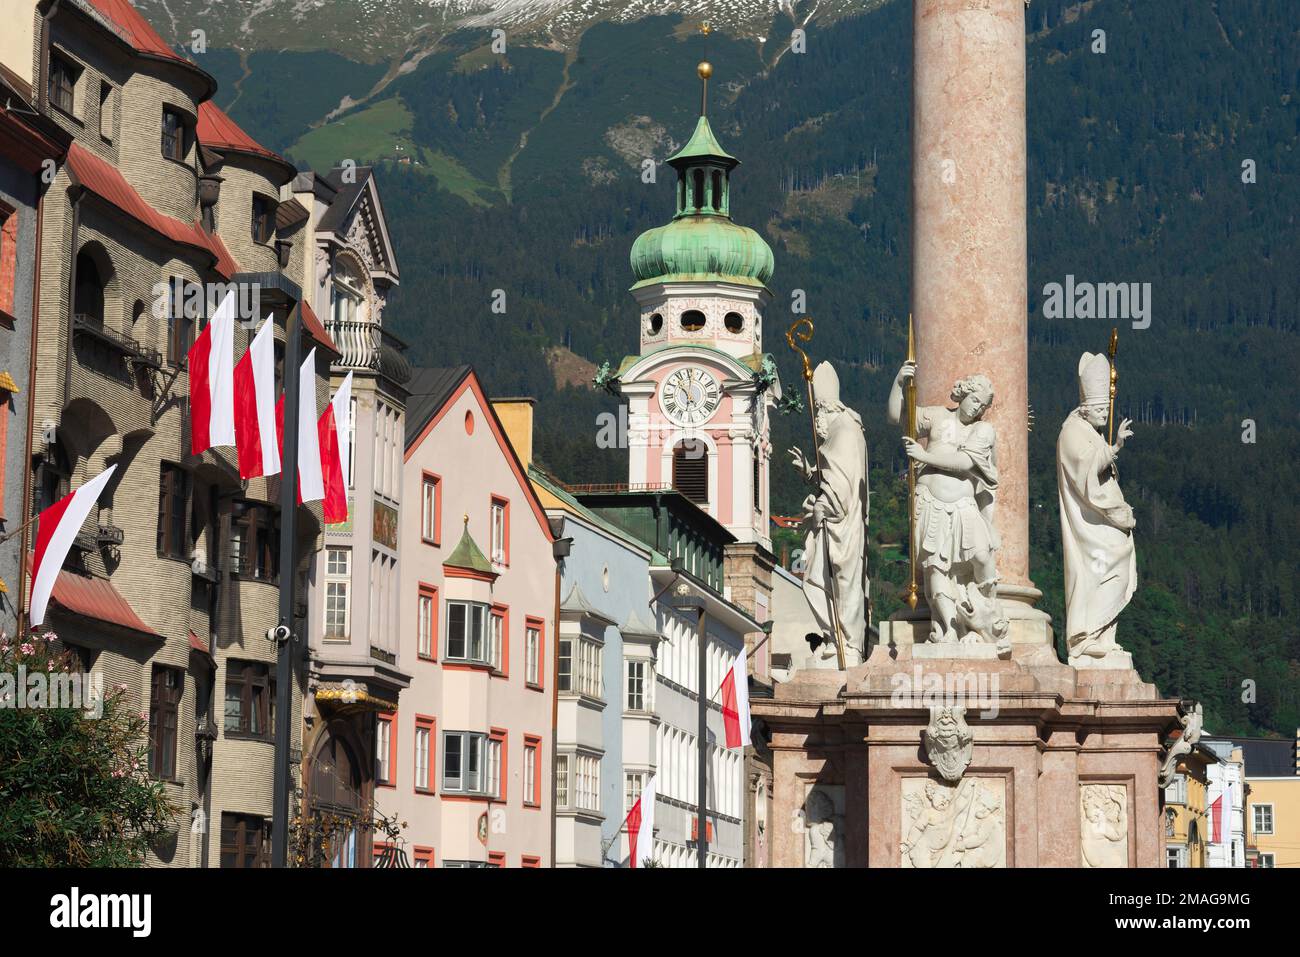 Austria Baroque, view of a range of Baroque architecture sited in Maria Theresien Strasse in historic Innsbruck, Austria Stock Photo